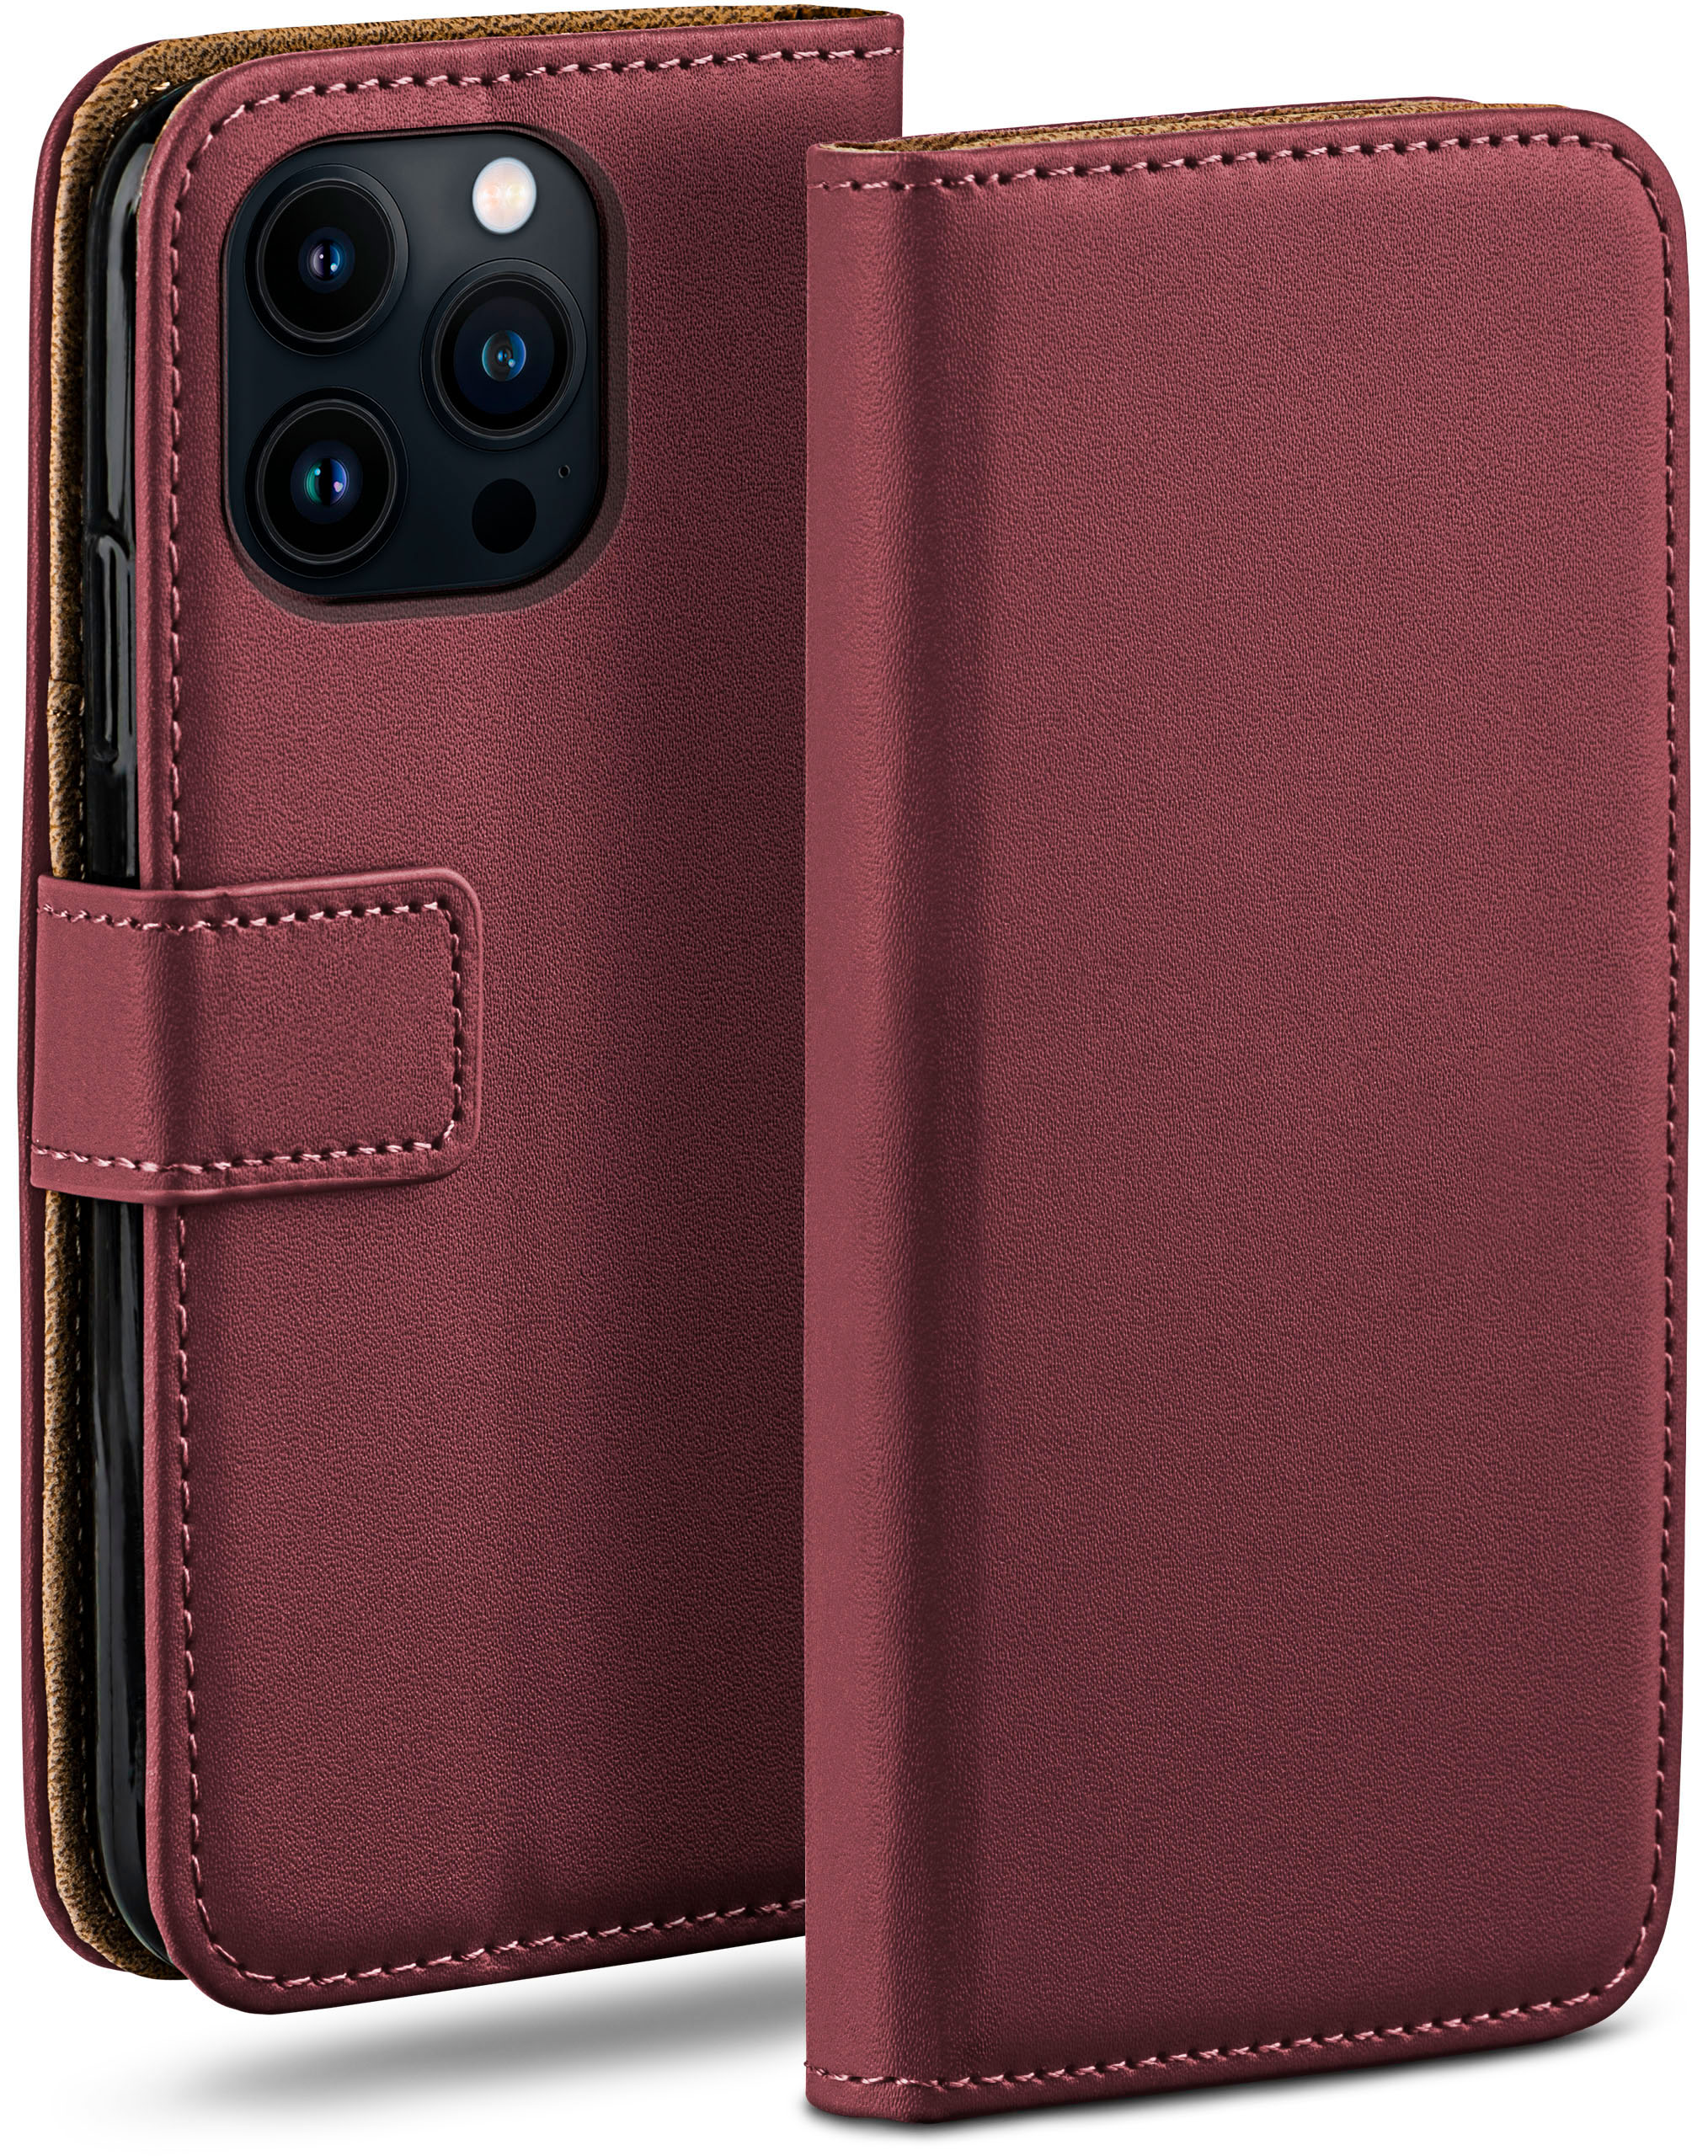 MOEX Book iPhone Pro 13 Case, Max, Apple, Maroon-Red Bookcover